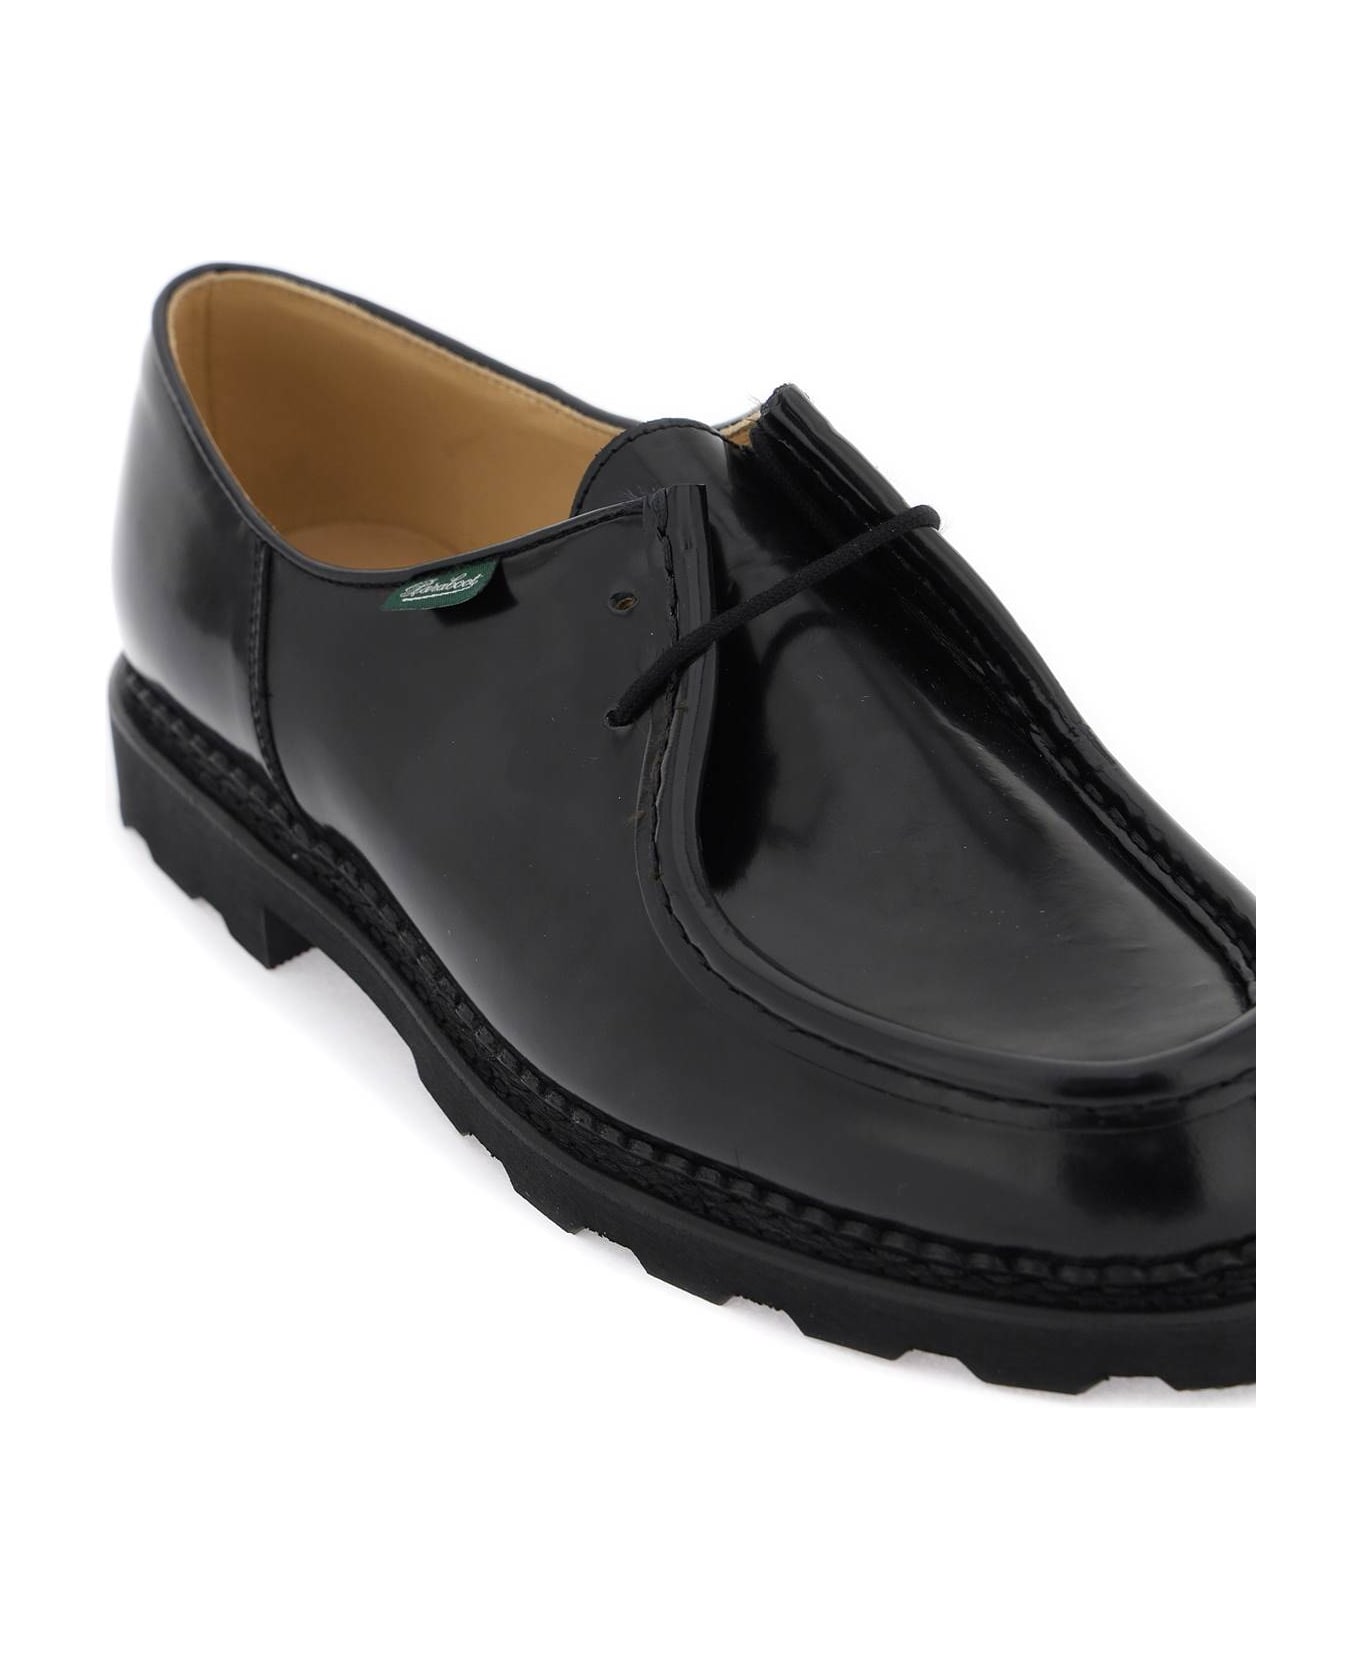 Paraboot Leather 'michael' Derby Shoes - Noire Gloss Noir ローファー＆デッキシューズ